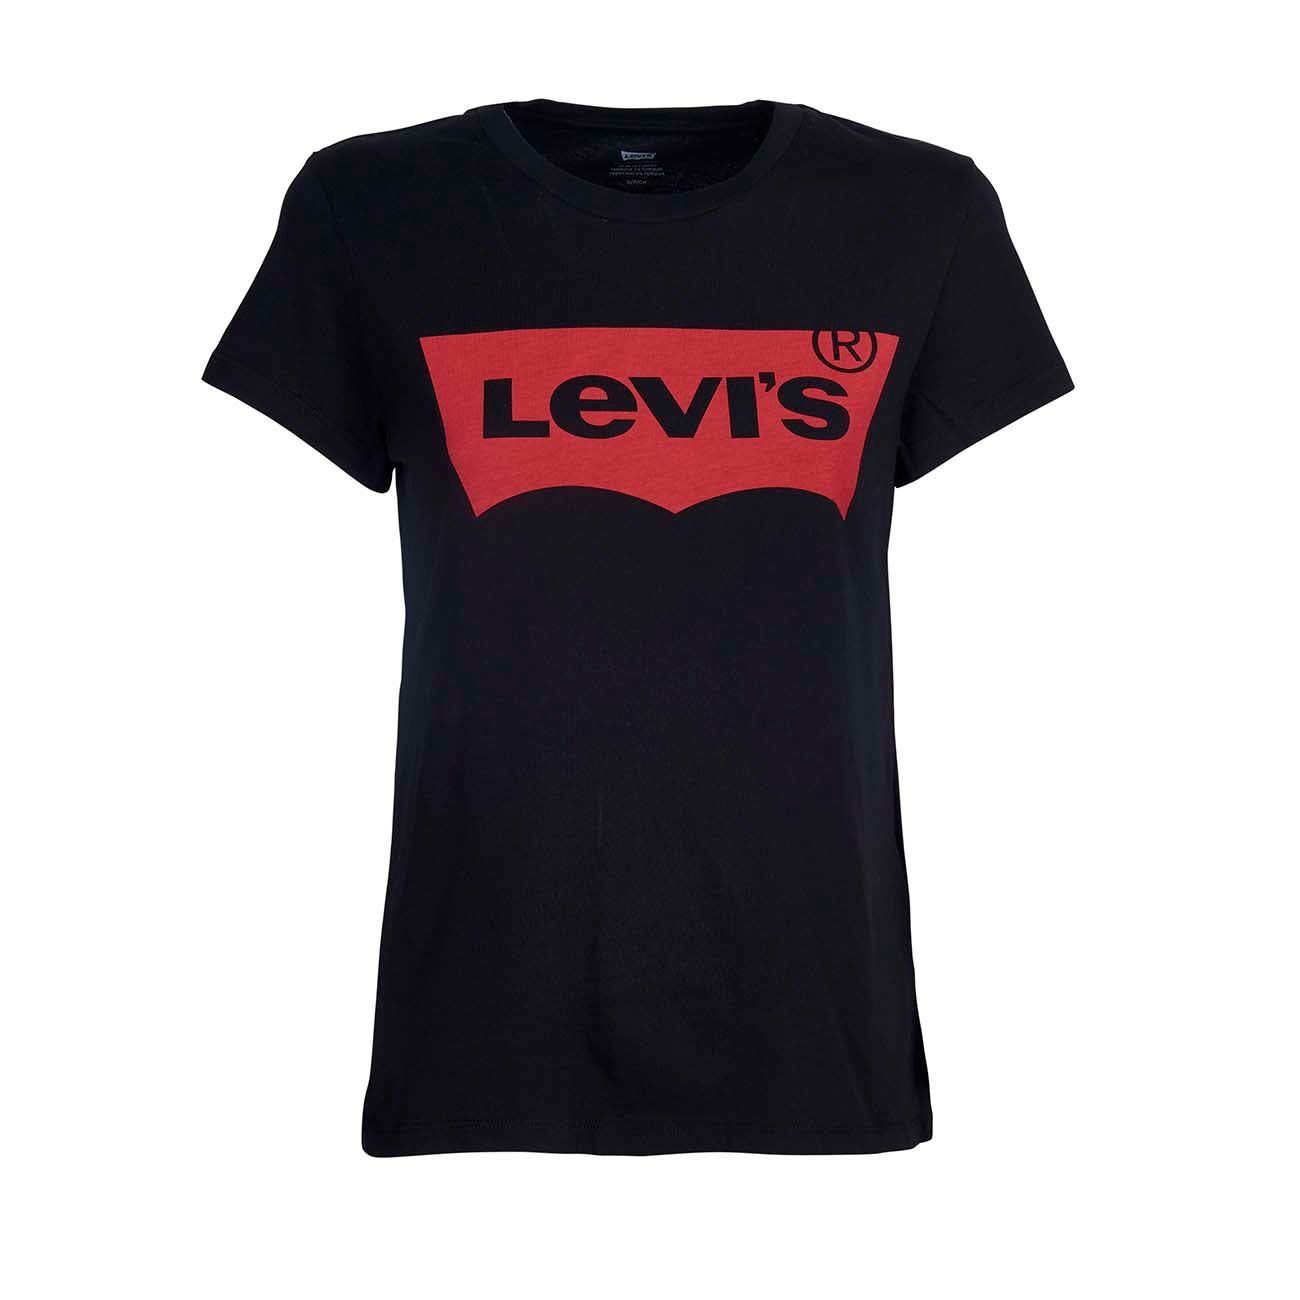 LEVIS T-SHIRT THE PERFECT GRAPHIC TEE WITH LOGO Woman Black Red |  Mascheroni Sportswear